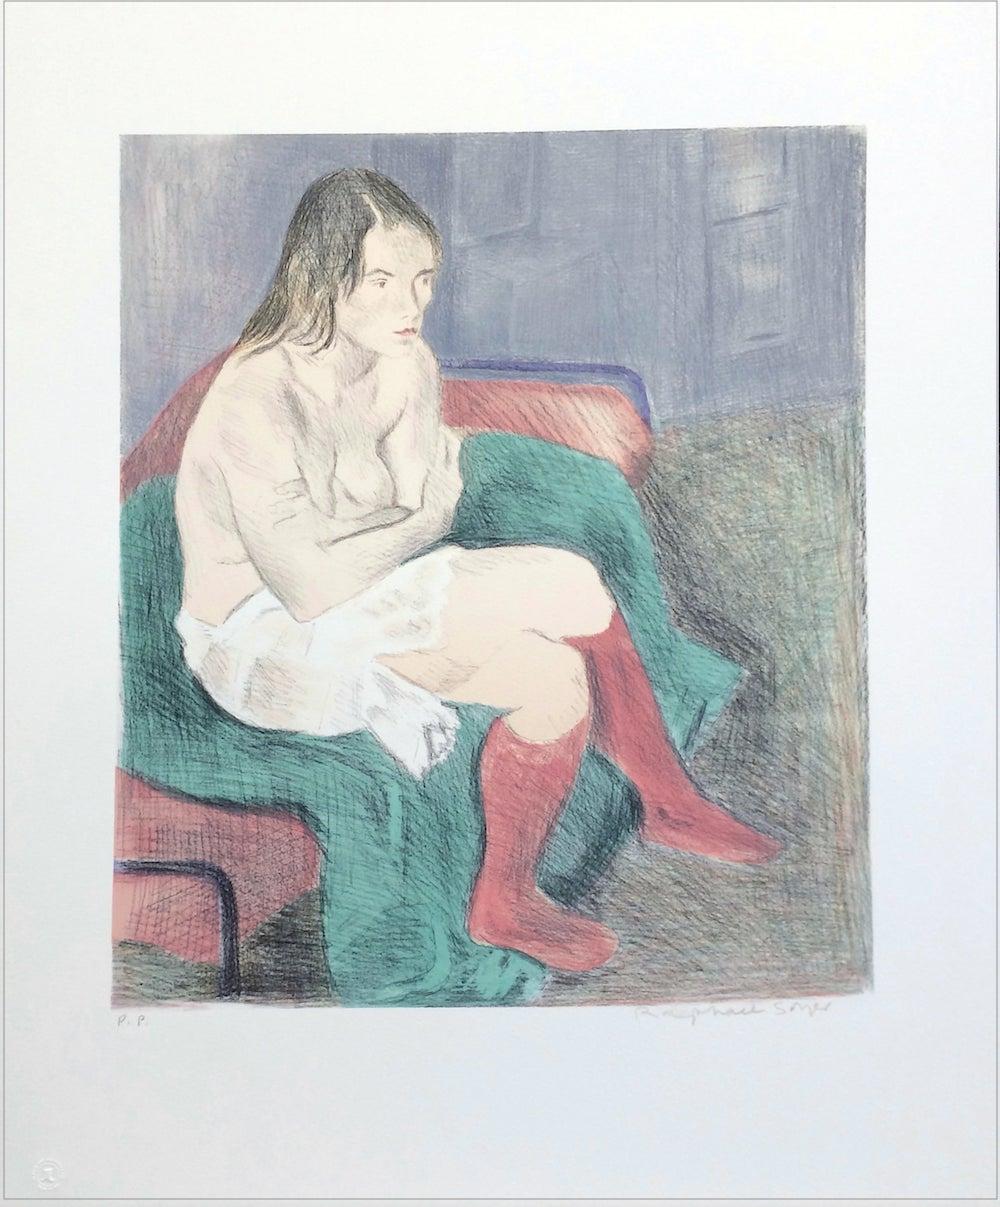 SEATED WOMAN PINK SOCKS Signed Lithograph, Female Portrait, Graphite Drawing